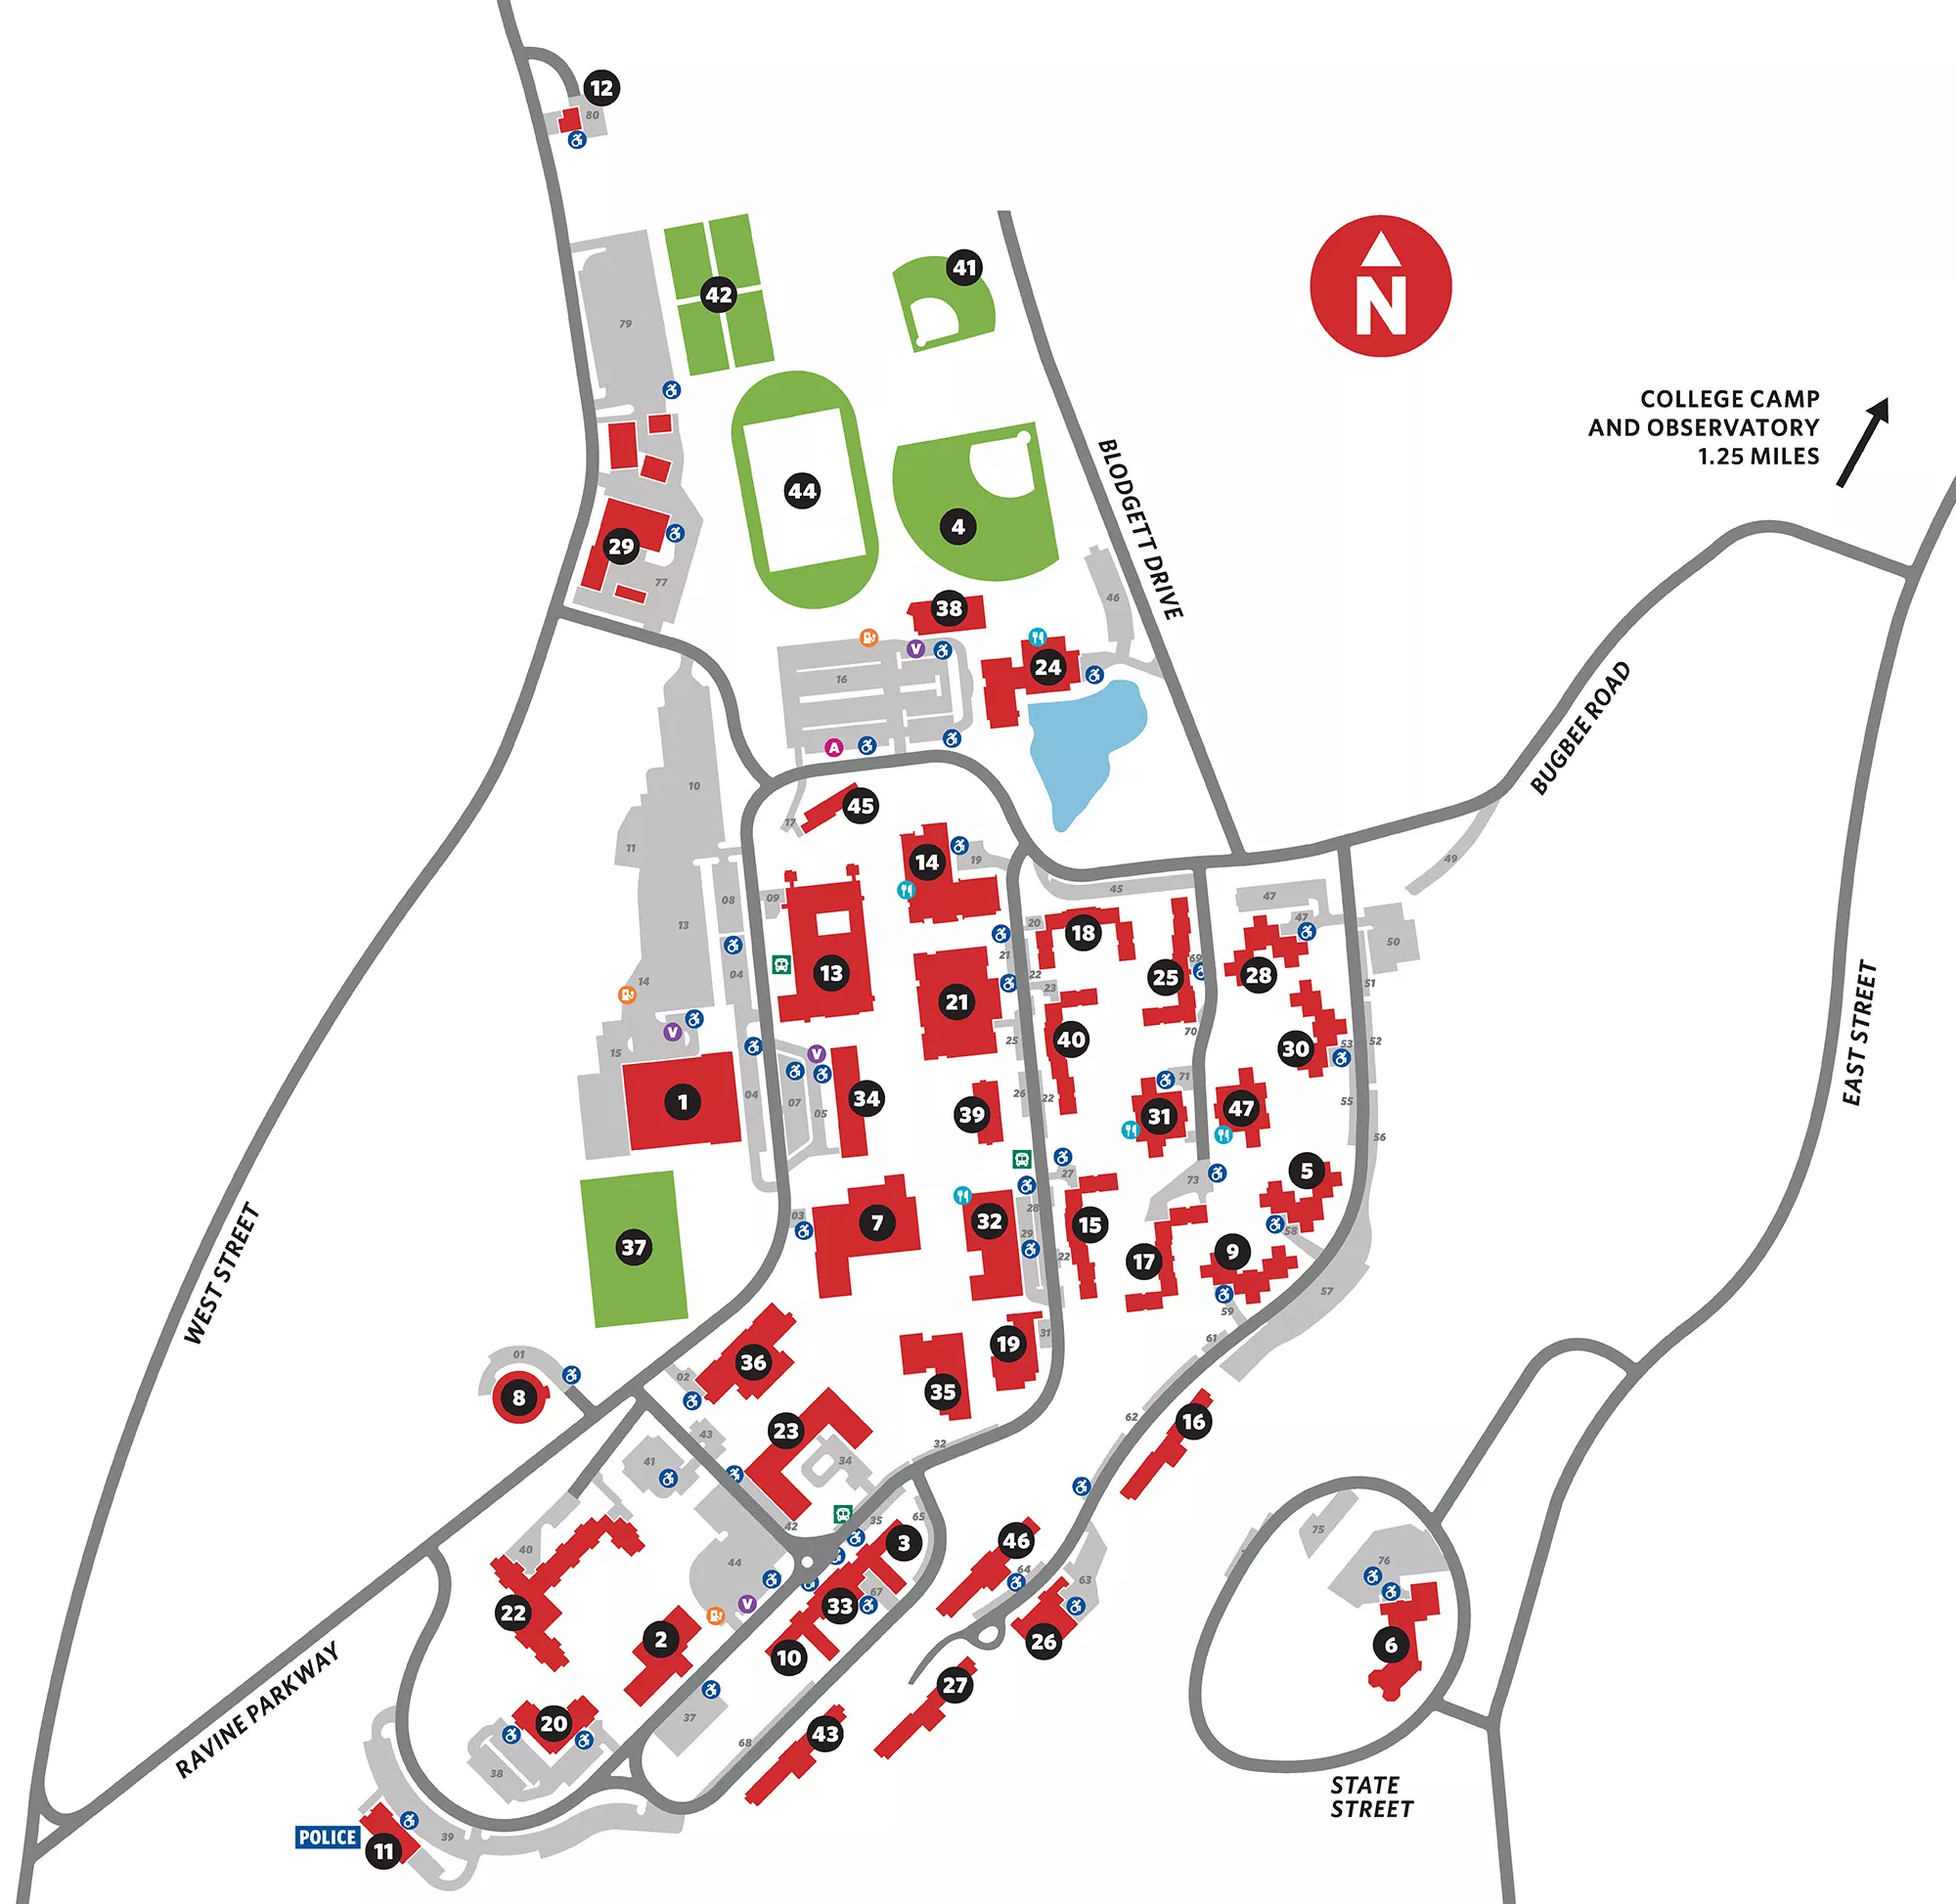 Image of Campus Map